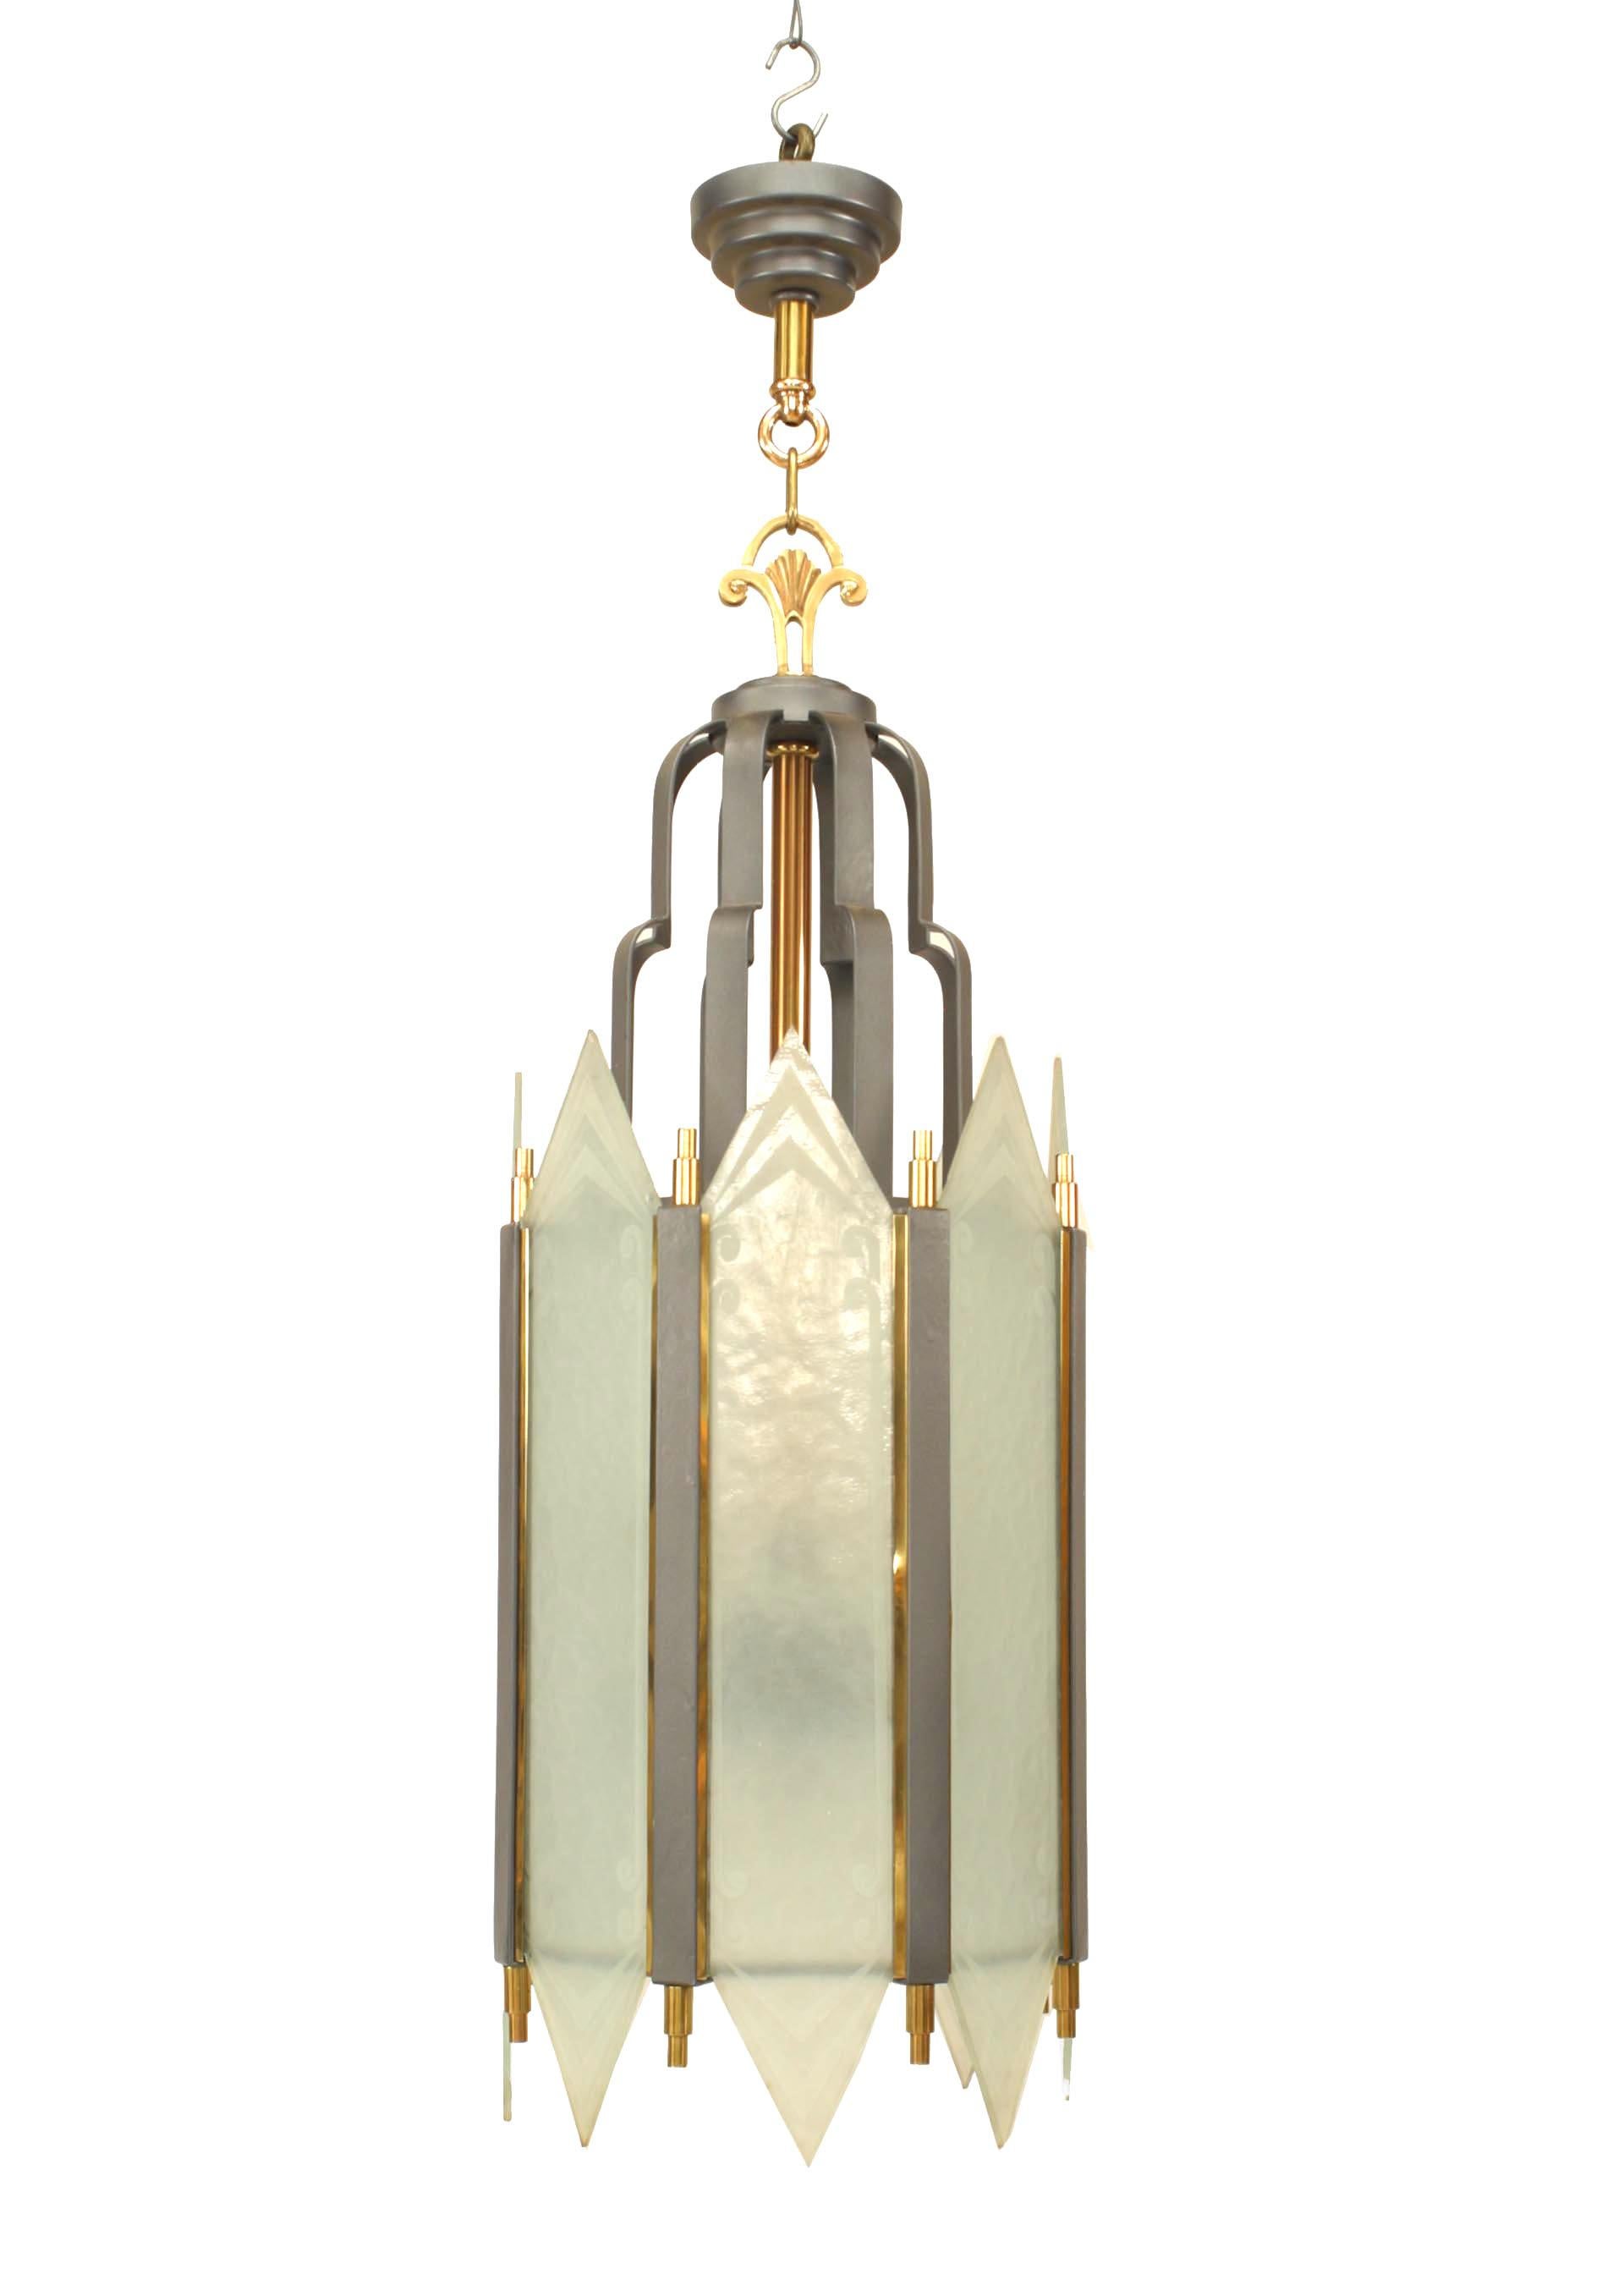 American Art Deco iron cylindrical form lantern with 8 etched geometric and scroll design frosted glass panels separated with brass finials under a 2 tiered top extension.
